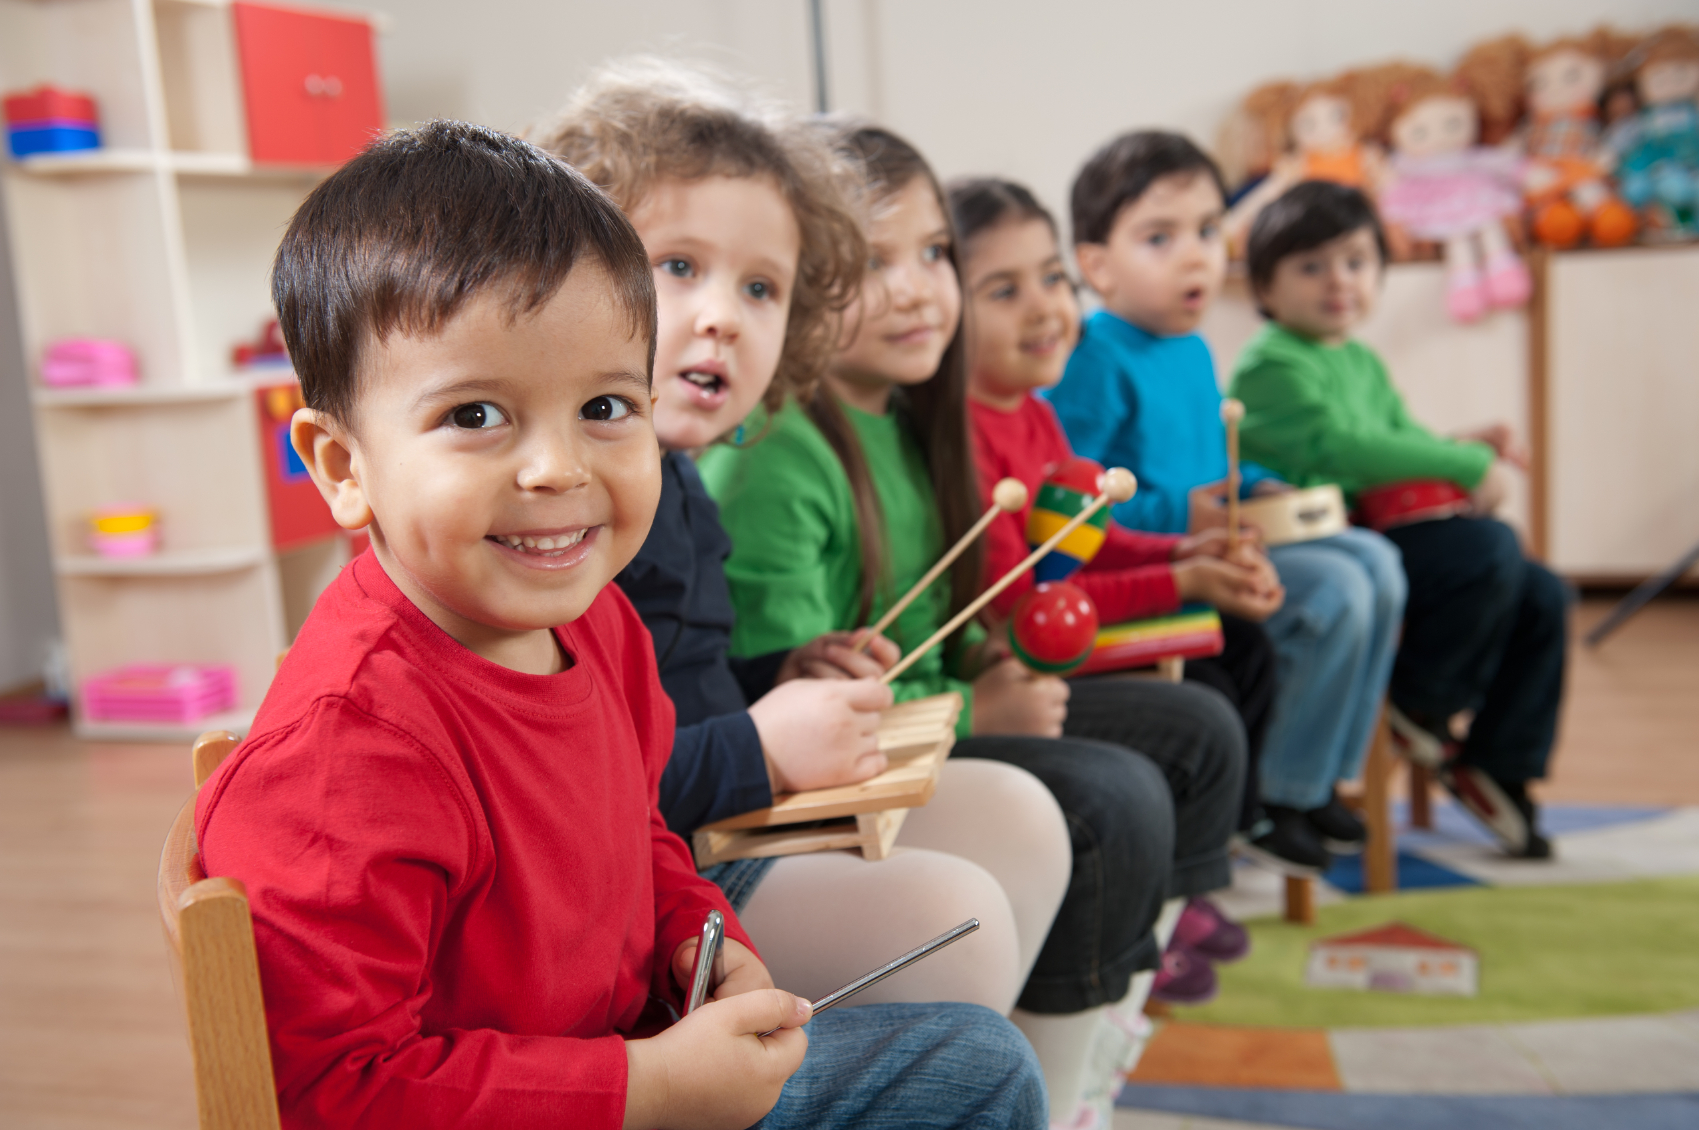 2 new brain studies look at music and learning in a group - Minds 